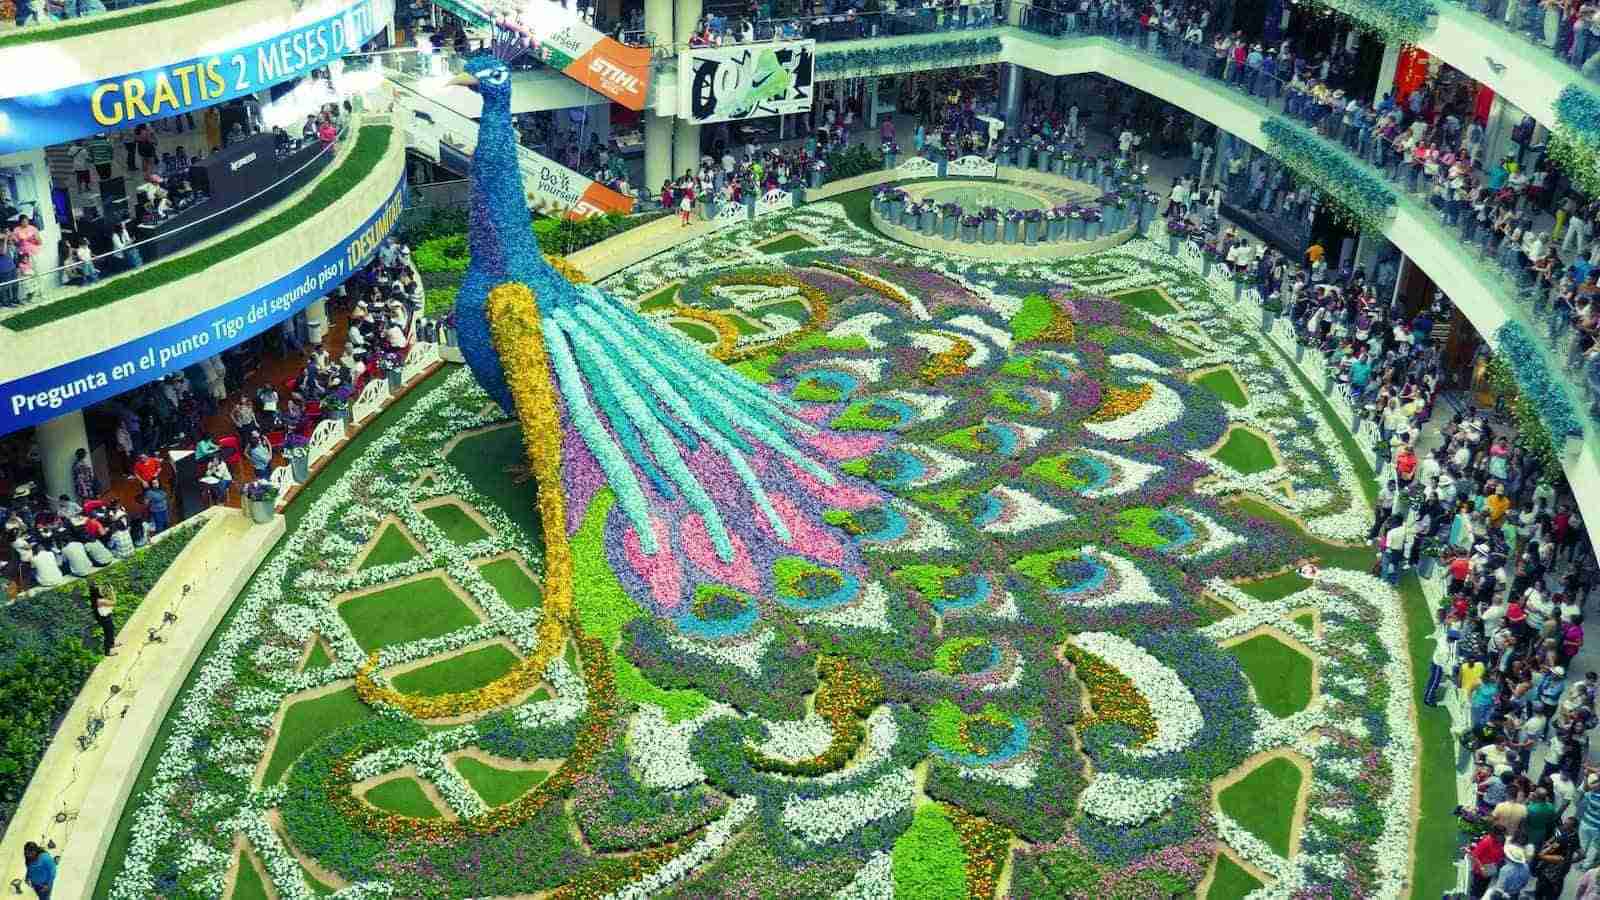 Once per year, each metropolitan area hosts a carnival in which local customs are presented entertainingly and artistically. If flowers magnetize you, we strongly recommend visiting Medellin's Flower Festival in August.